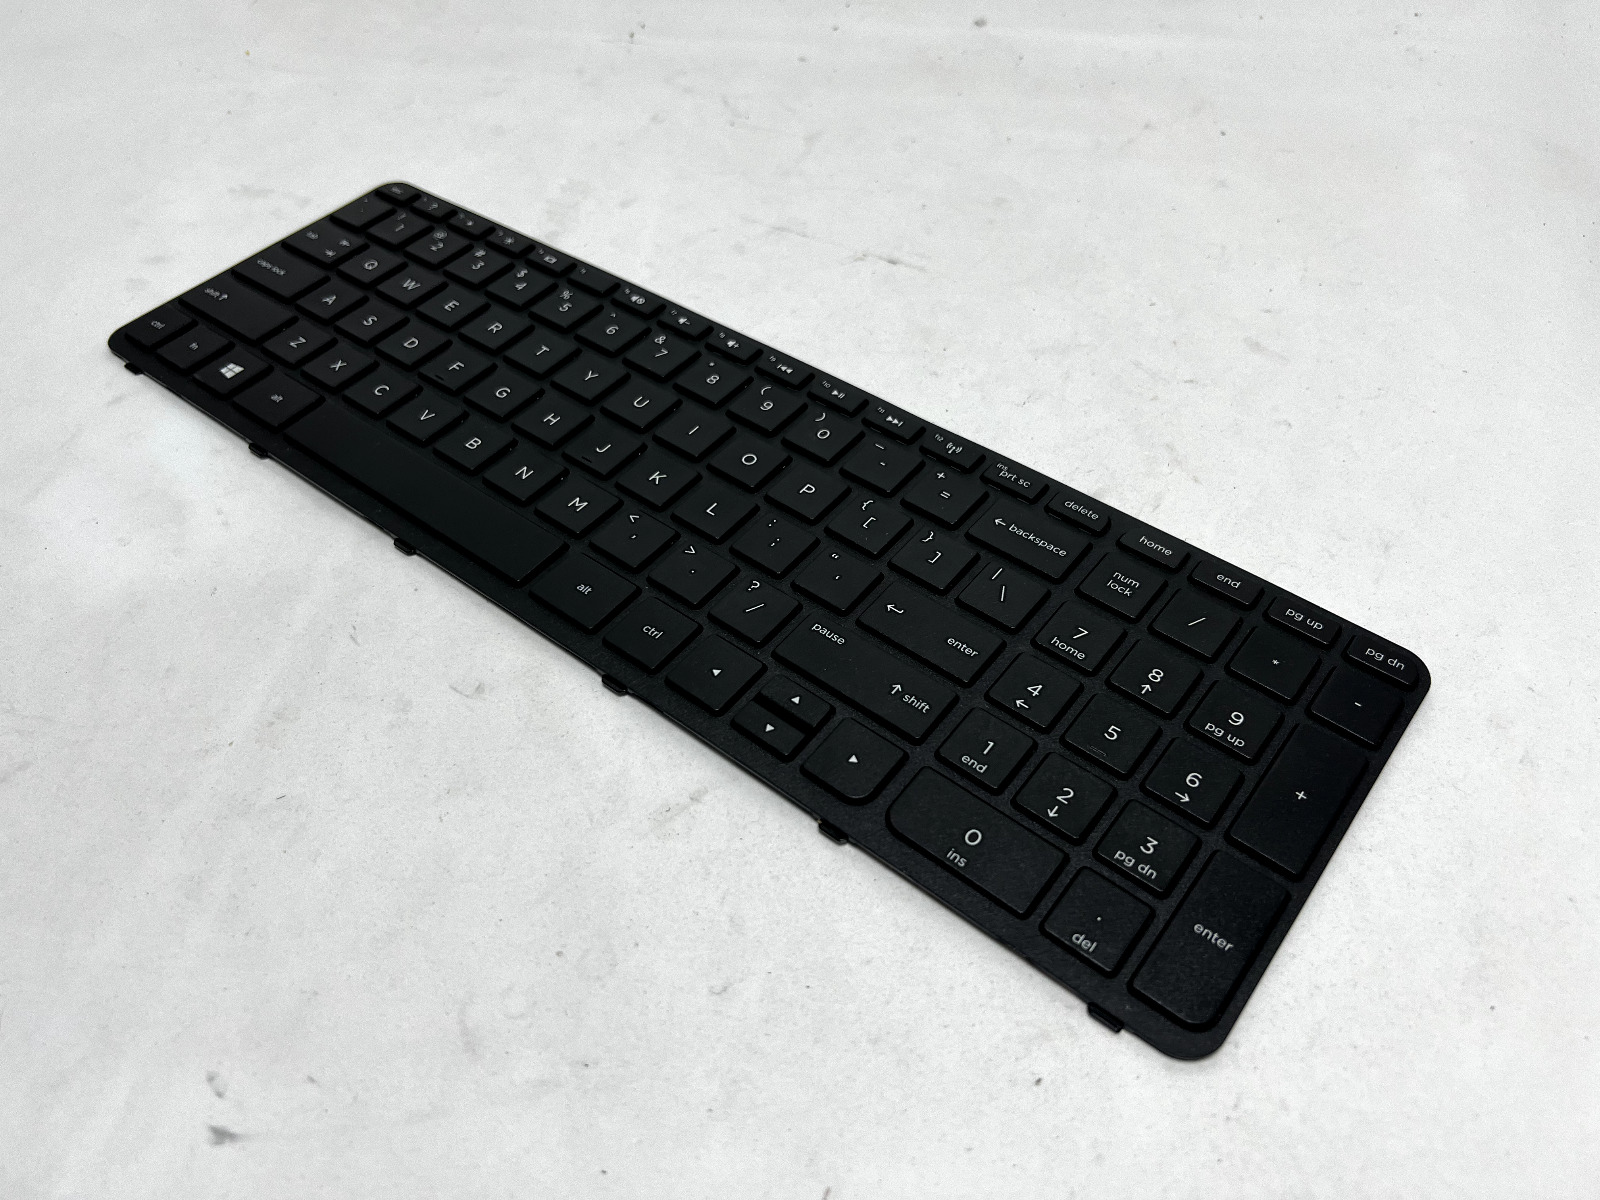 HP TouchSmart 15.6” 15-r015dx Genuine US Keyboard PK1314D2A00 749658-001 Grd A